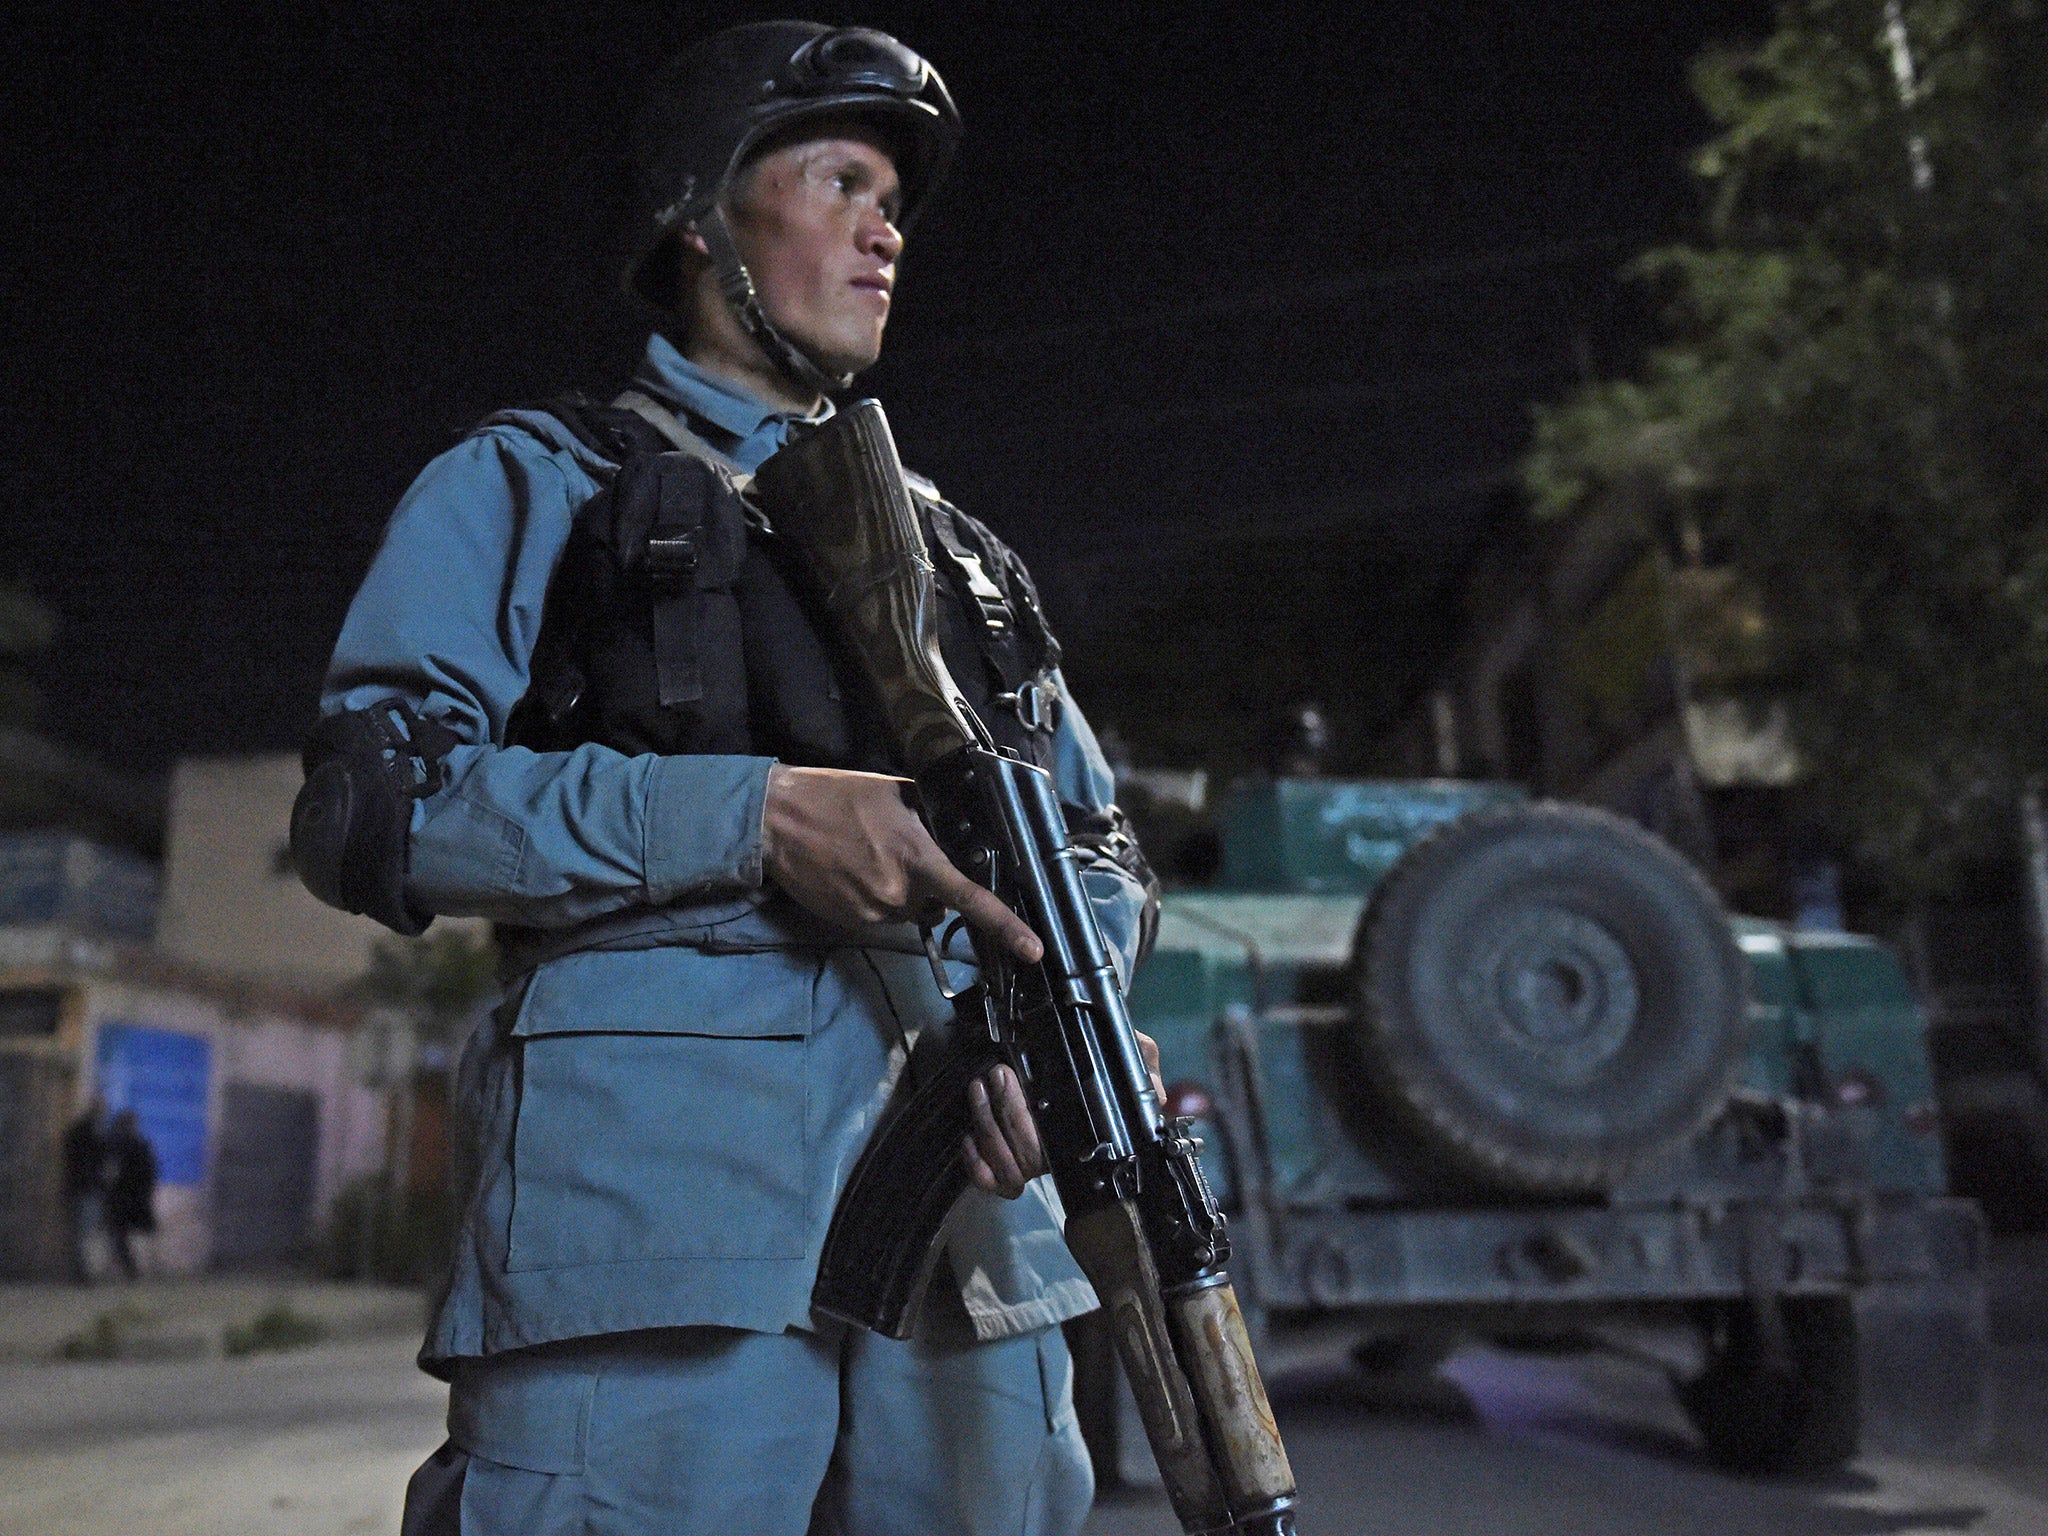 An Afghan policeman stands guard near the Park Place guesthouse in Kabul